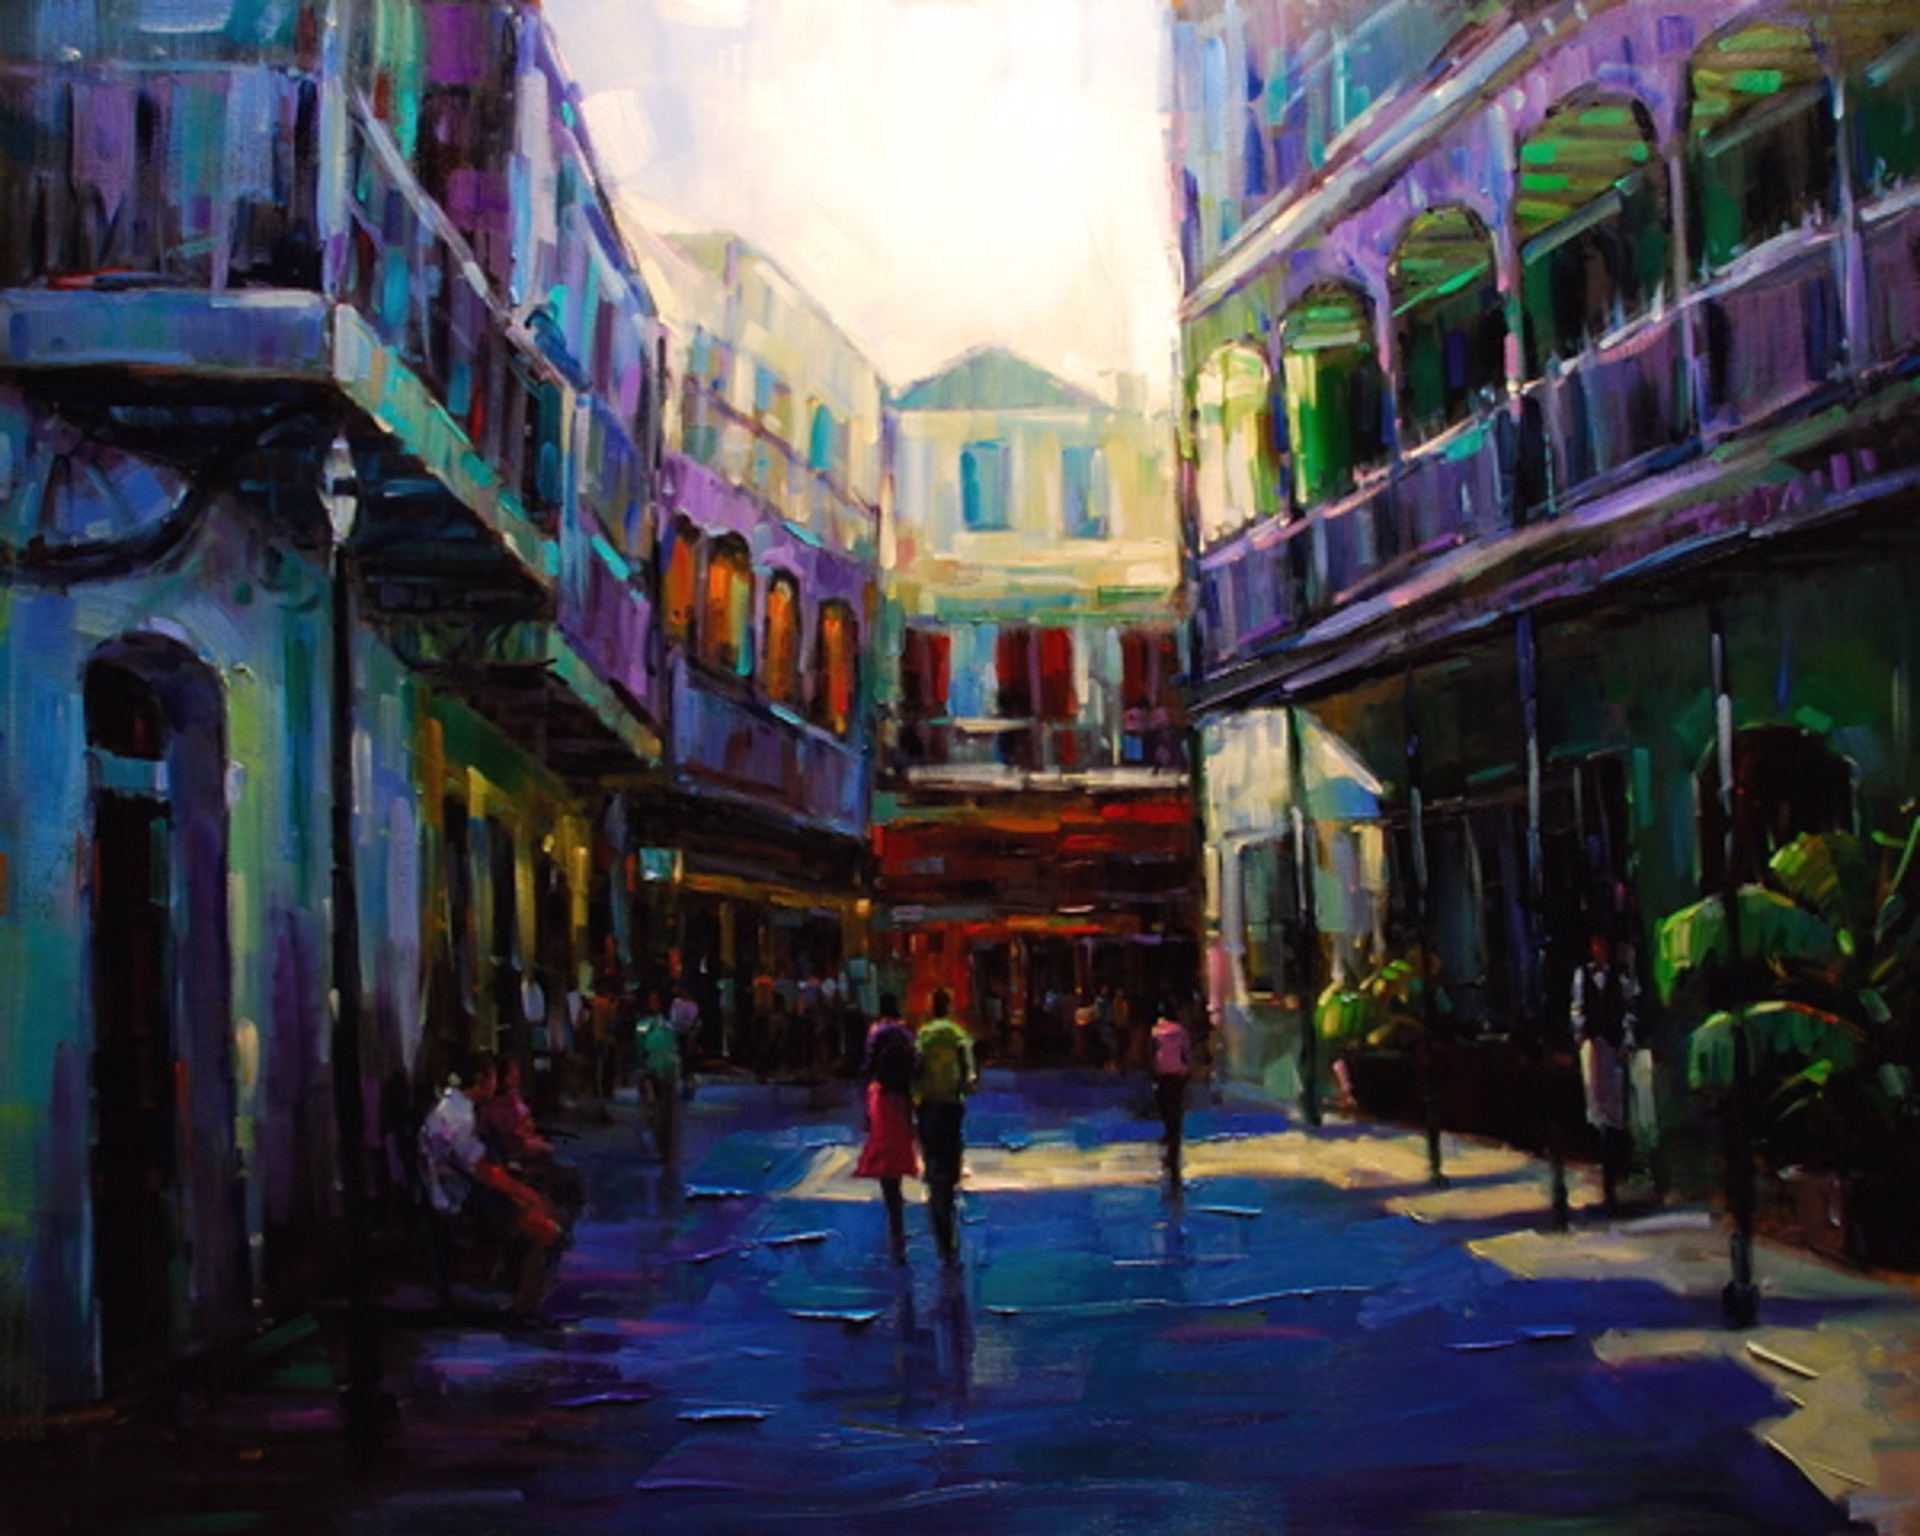 Quarter Past  (Available in 40x50", 24x30", and16x20") by Michael Flohr